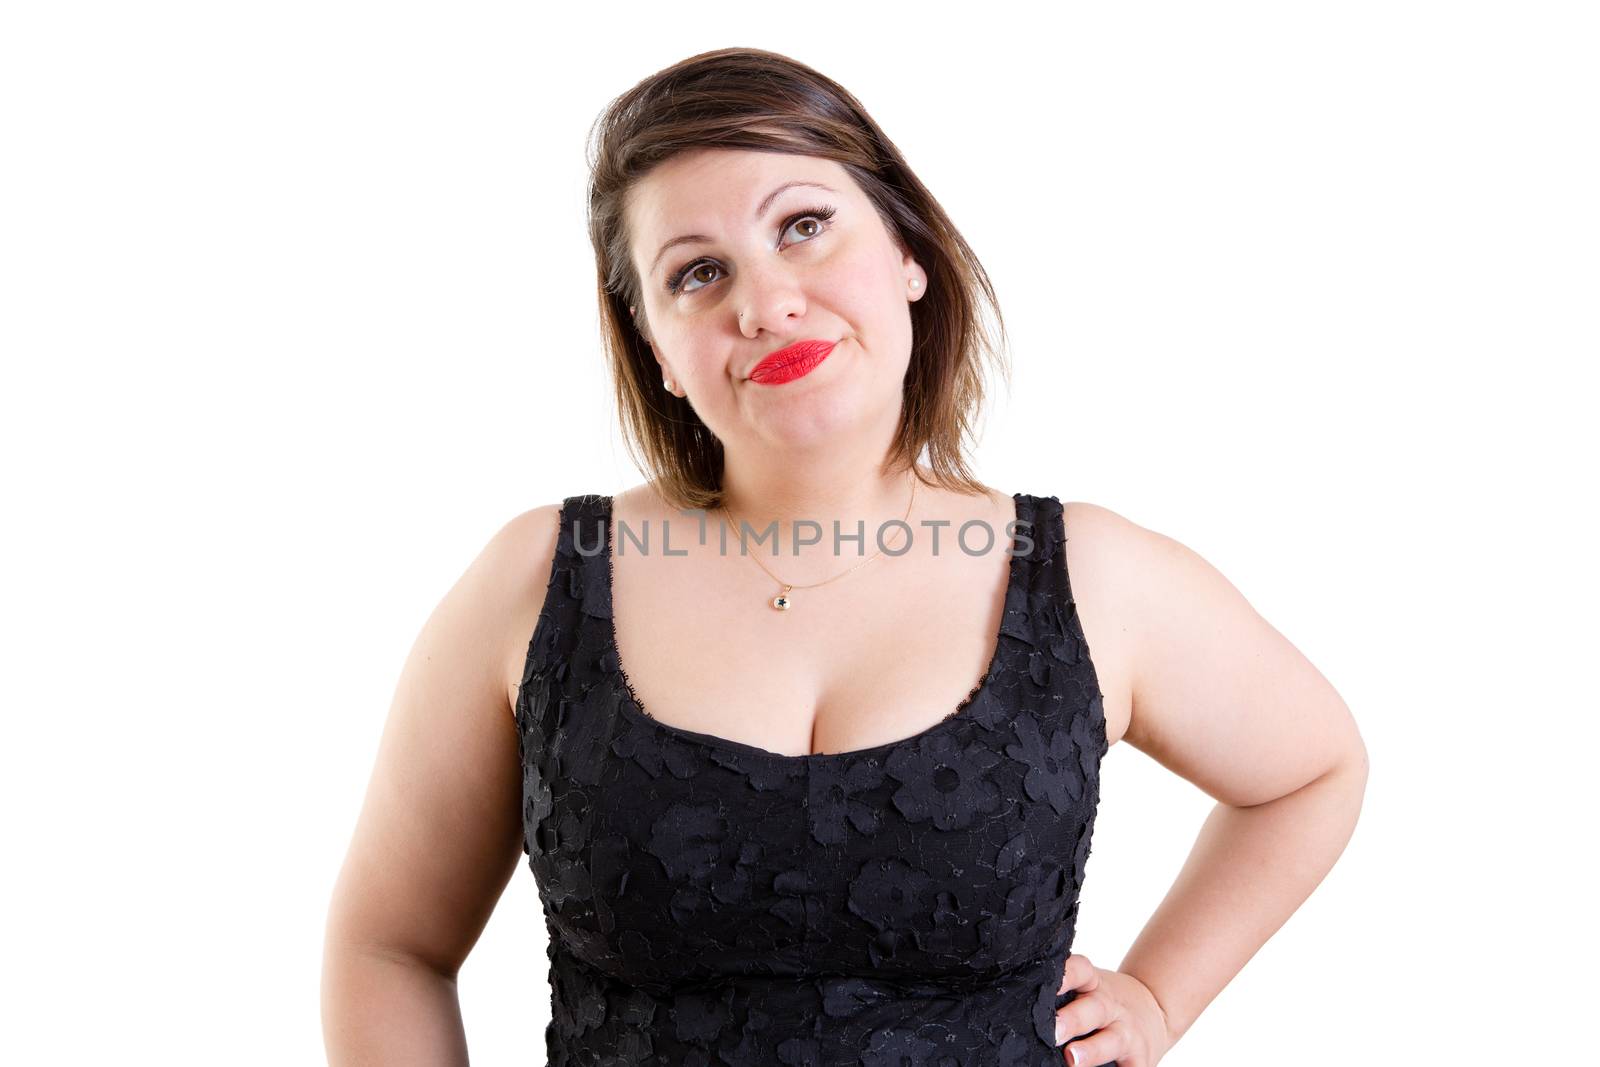 Pensive woman standing thinking looking up into the air with her hand on her hip and a serious expression, isolated on white